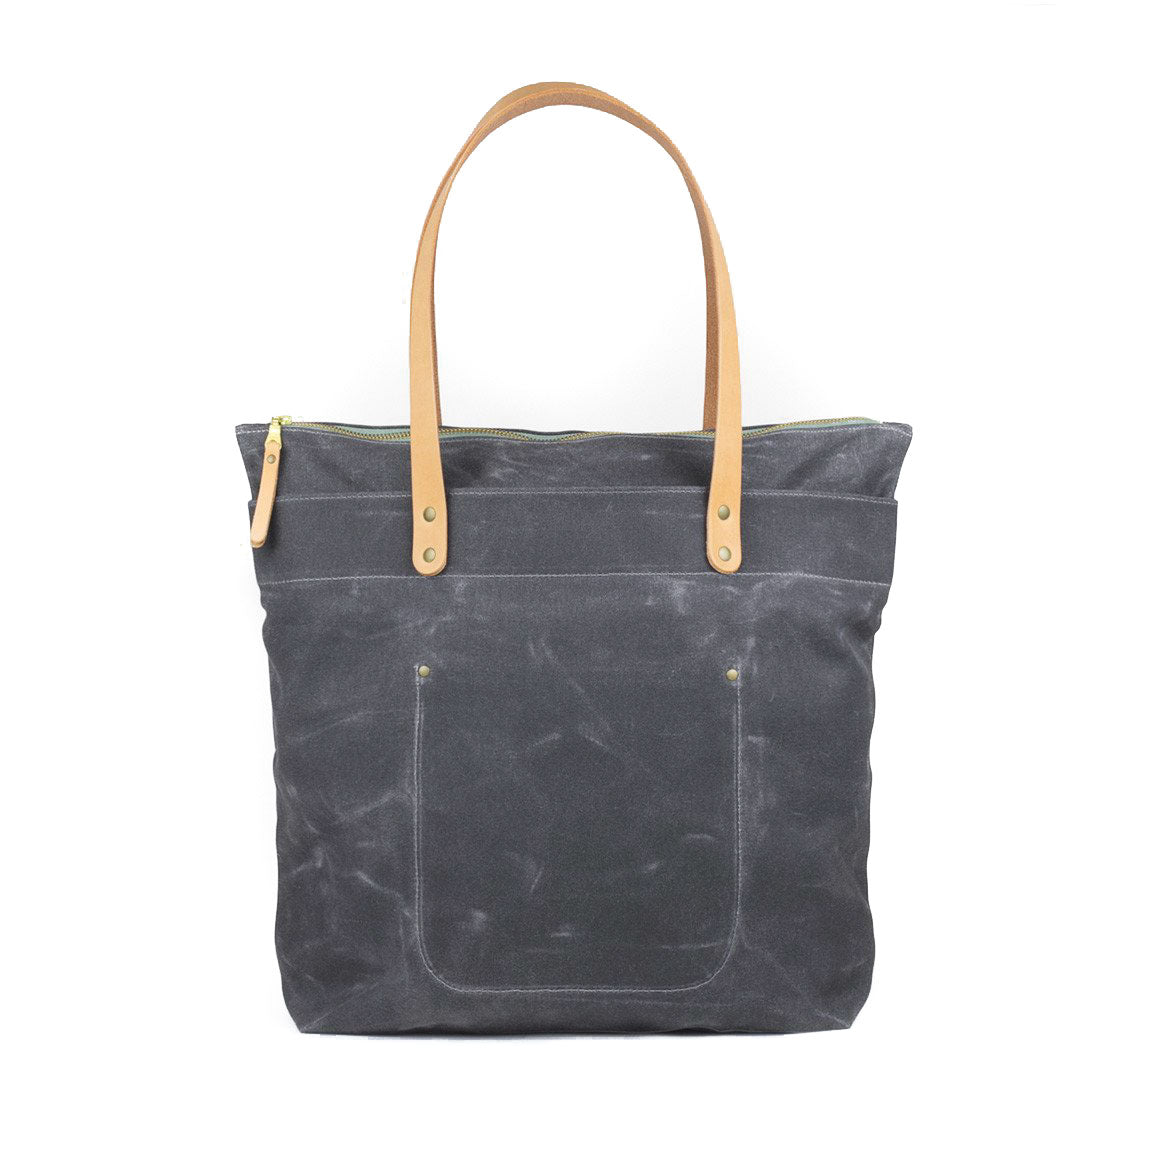 Zipper Tote Grey Waxed Canvas & Natural Leather